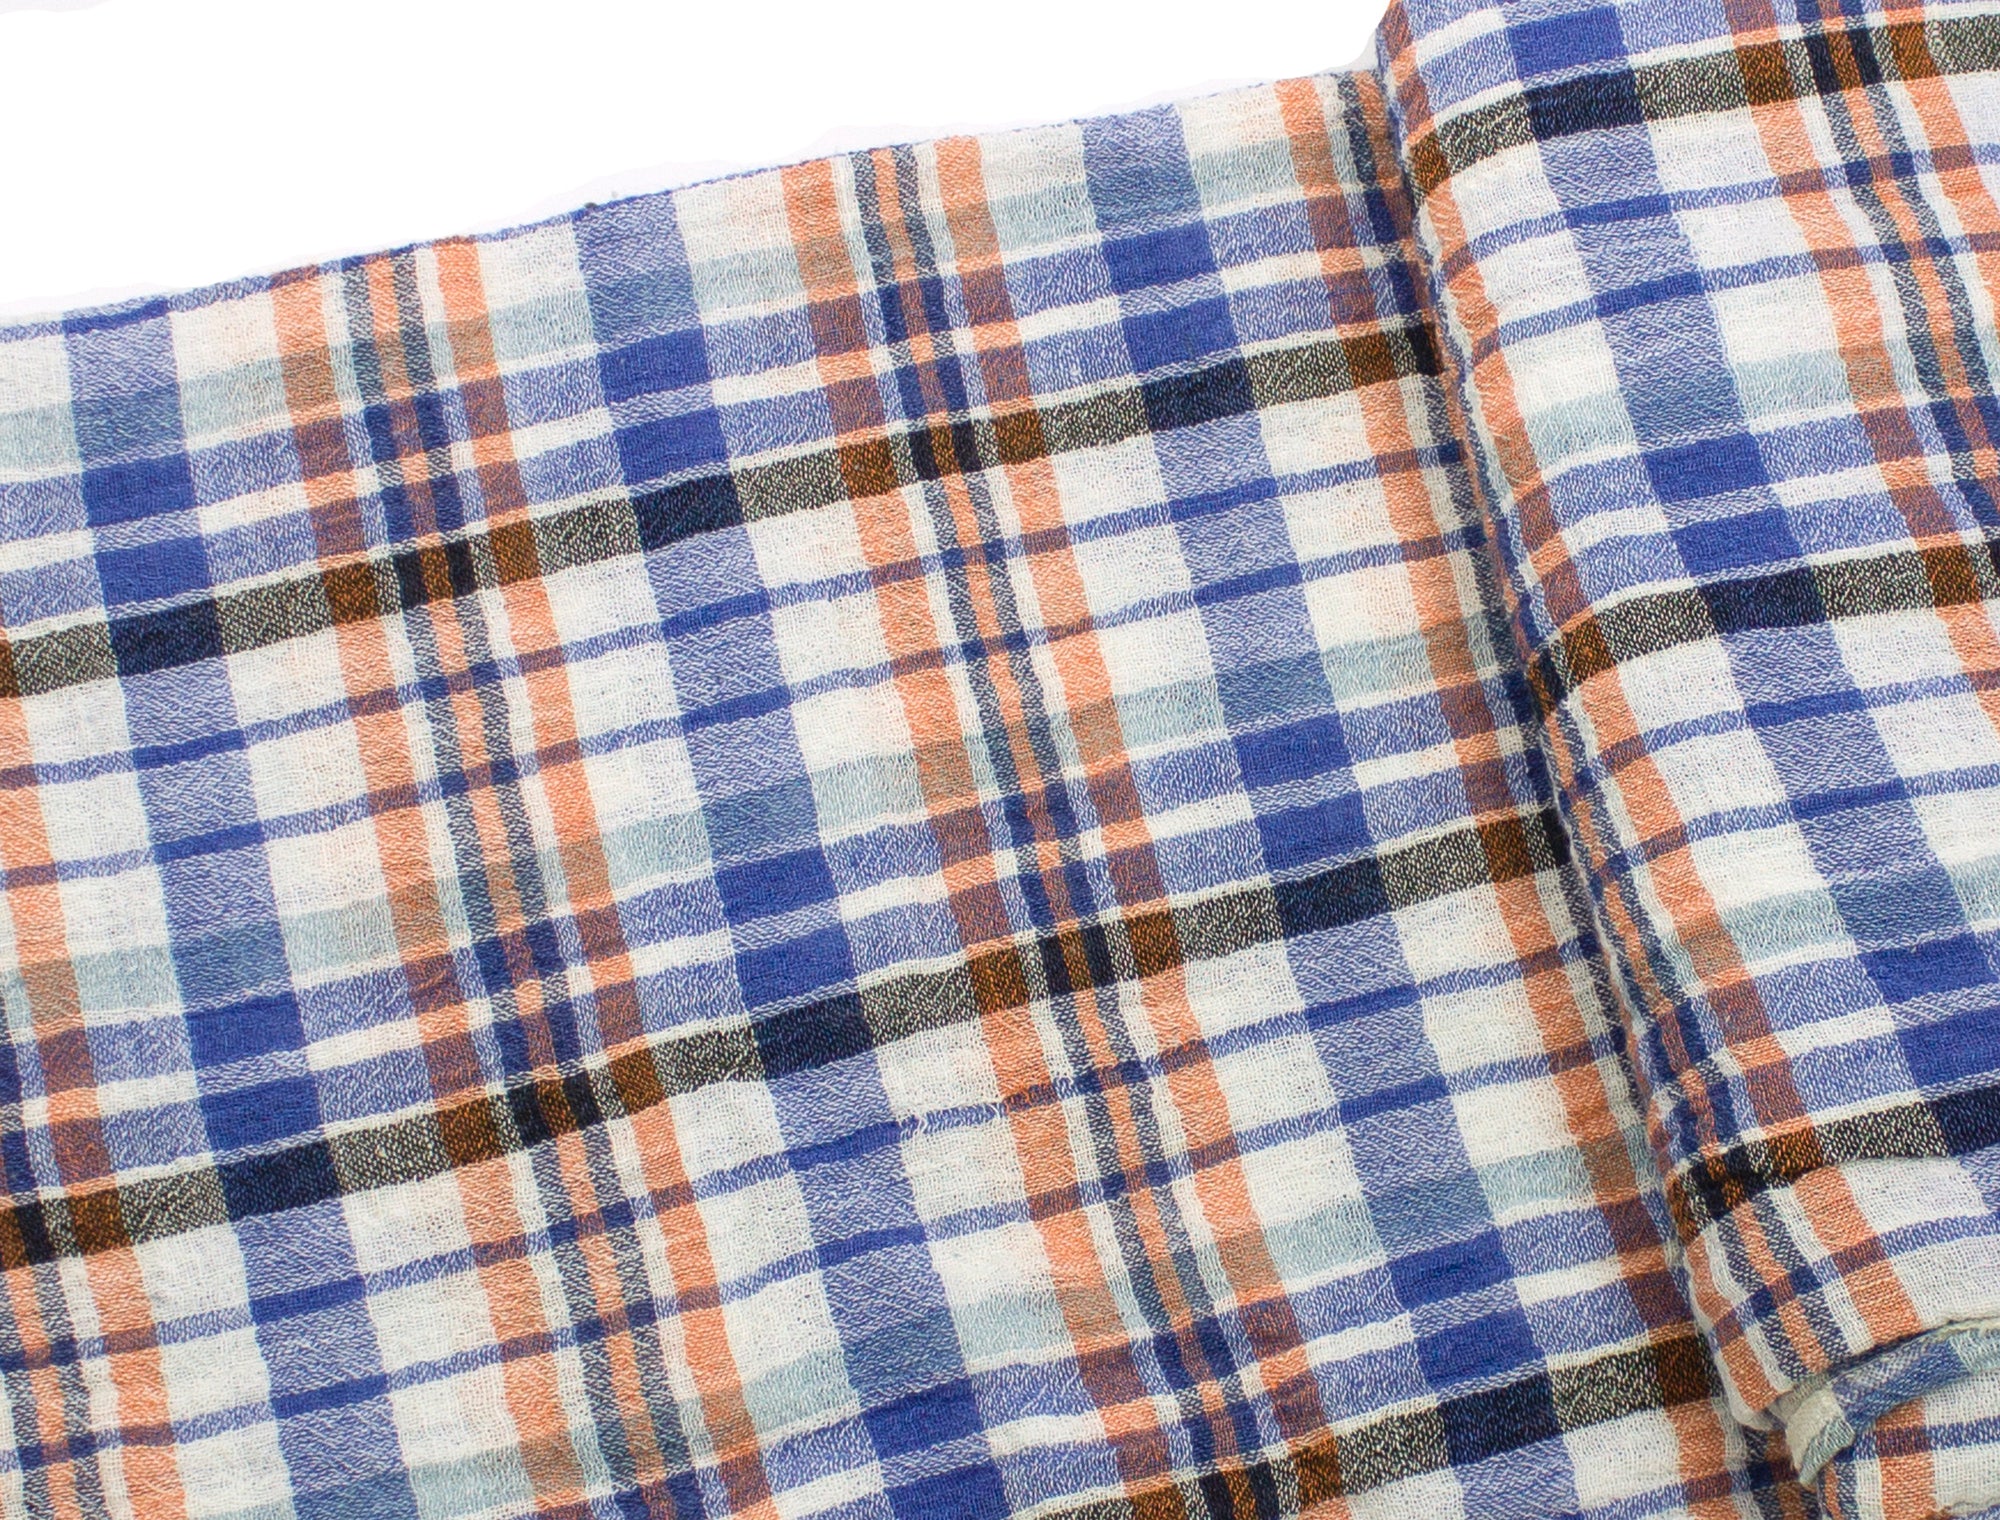 Vintage Fabric Royal Blue, Orange, White Plaid Cotton Crinkle 40" Wide Sold by the Yard